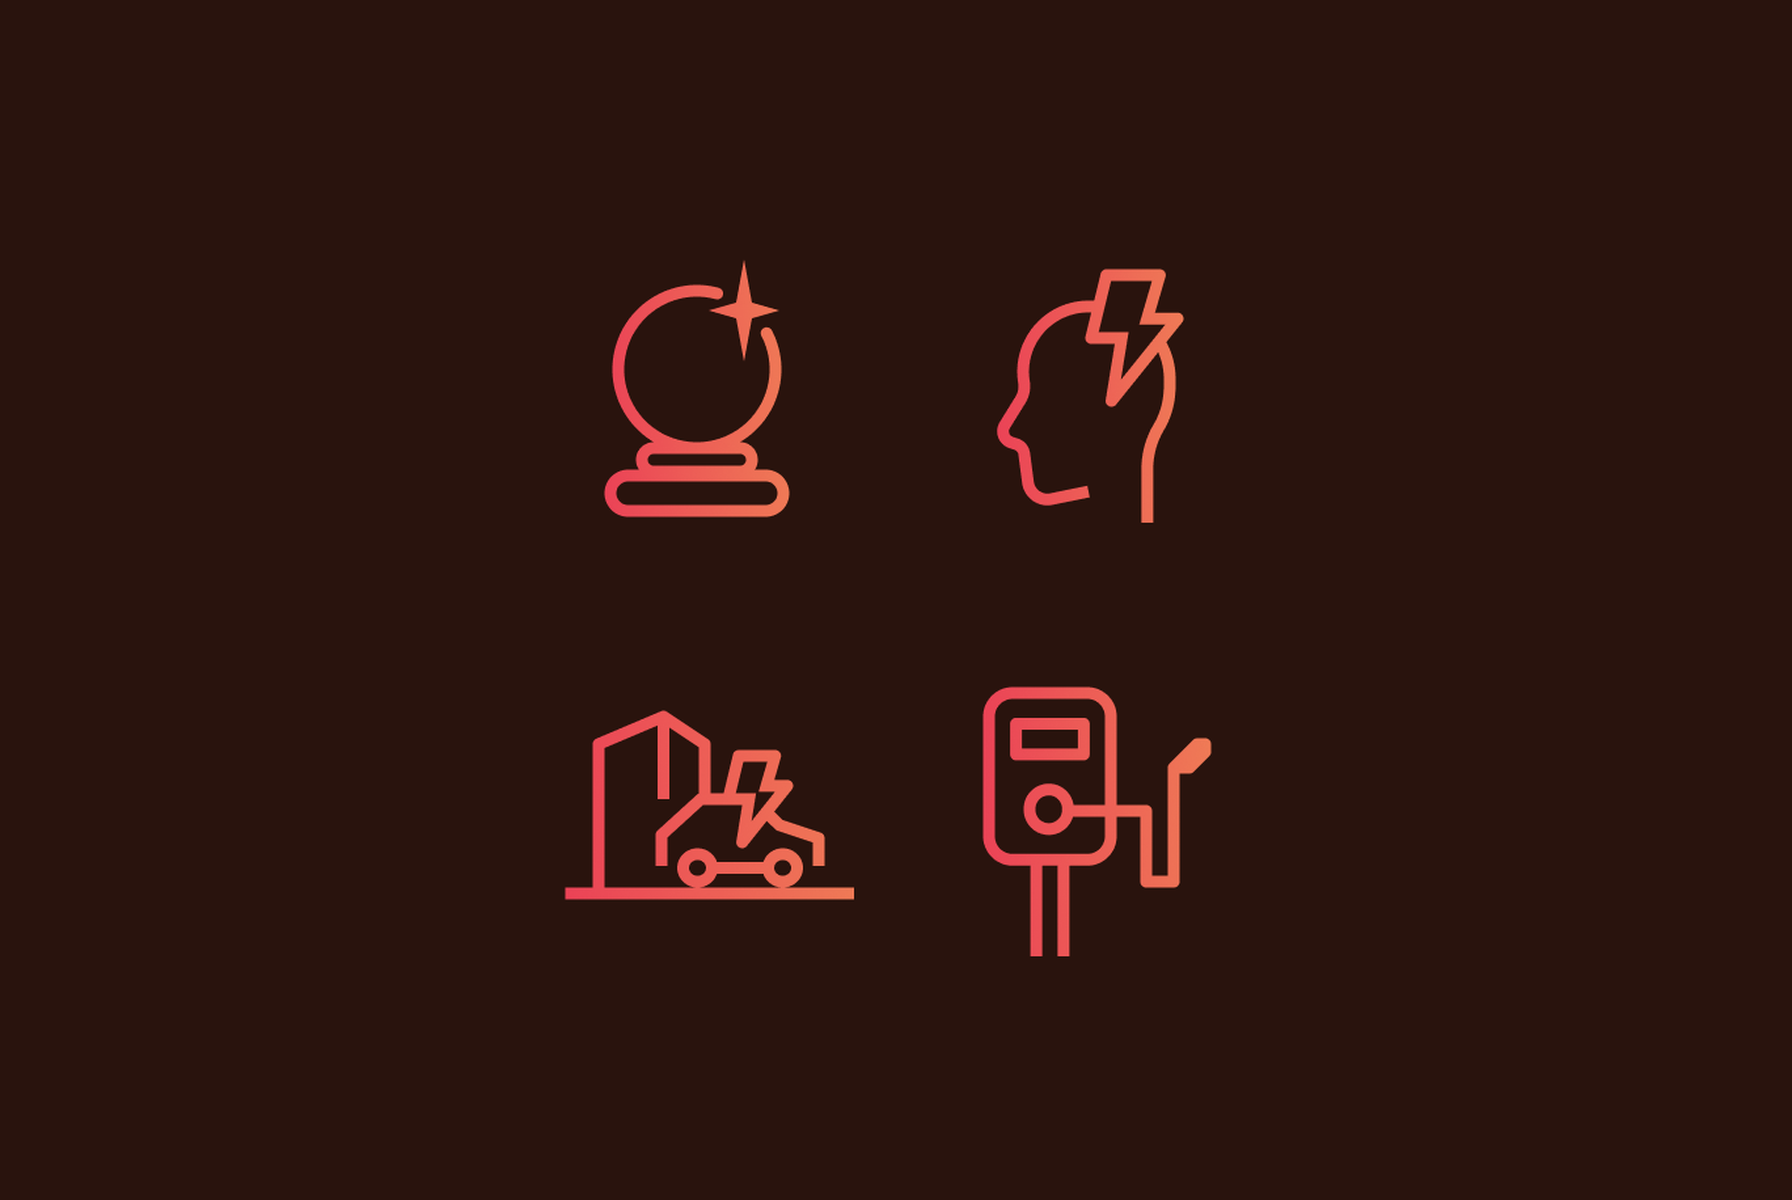 Detailed shot of a selection of icons for Eneco eMobility